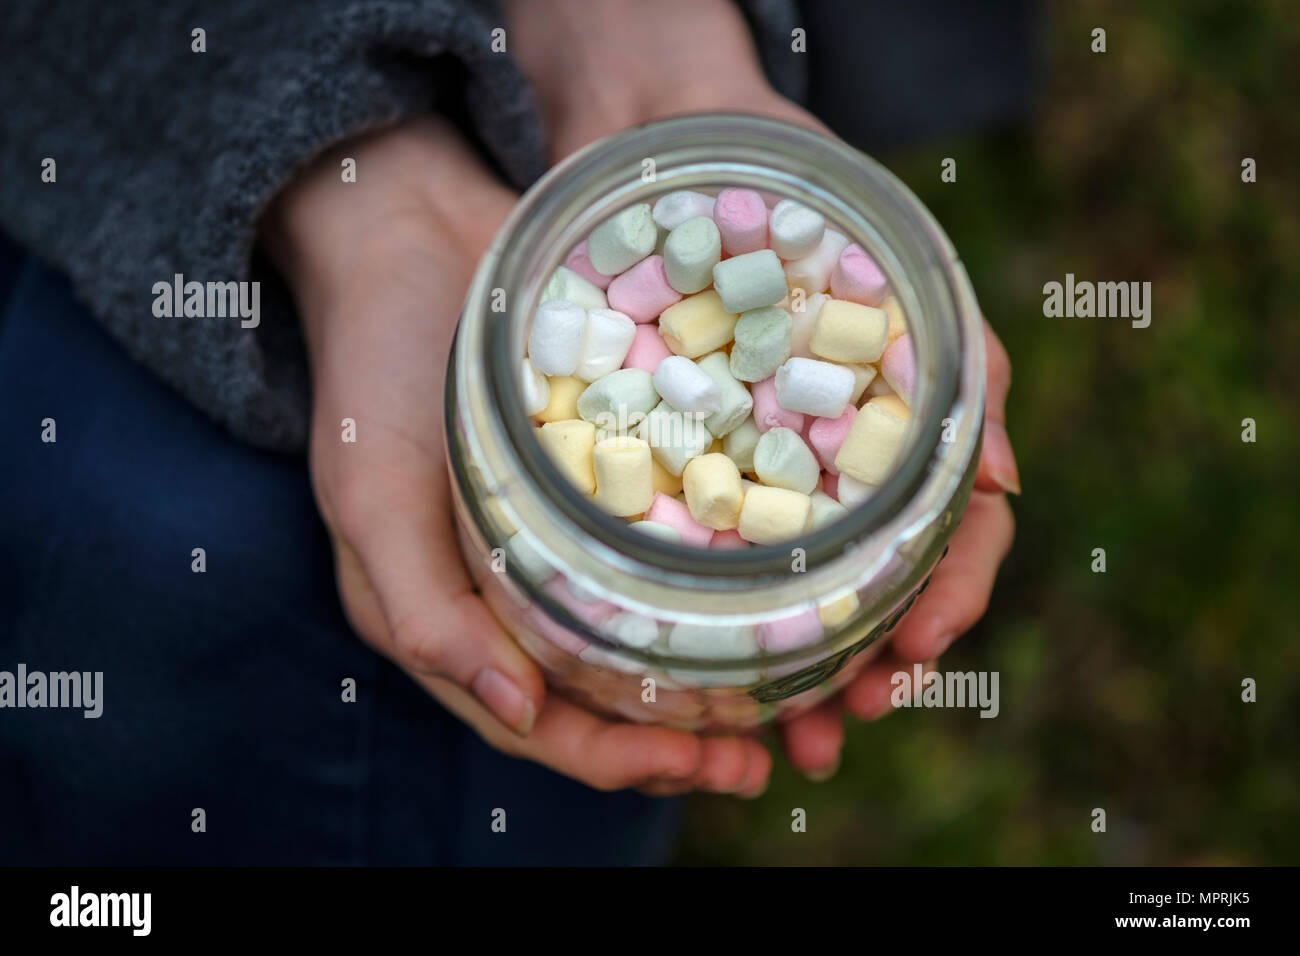 Hands holding glass of marshmallows, close-up Stock Photo